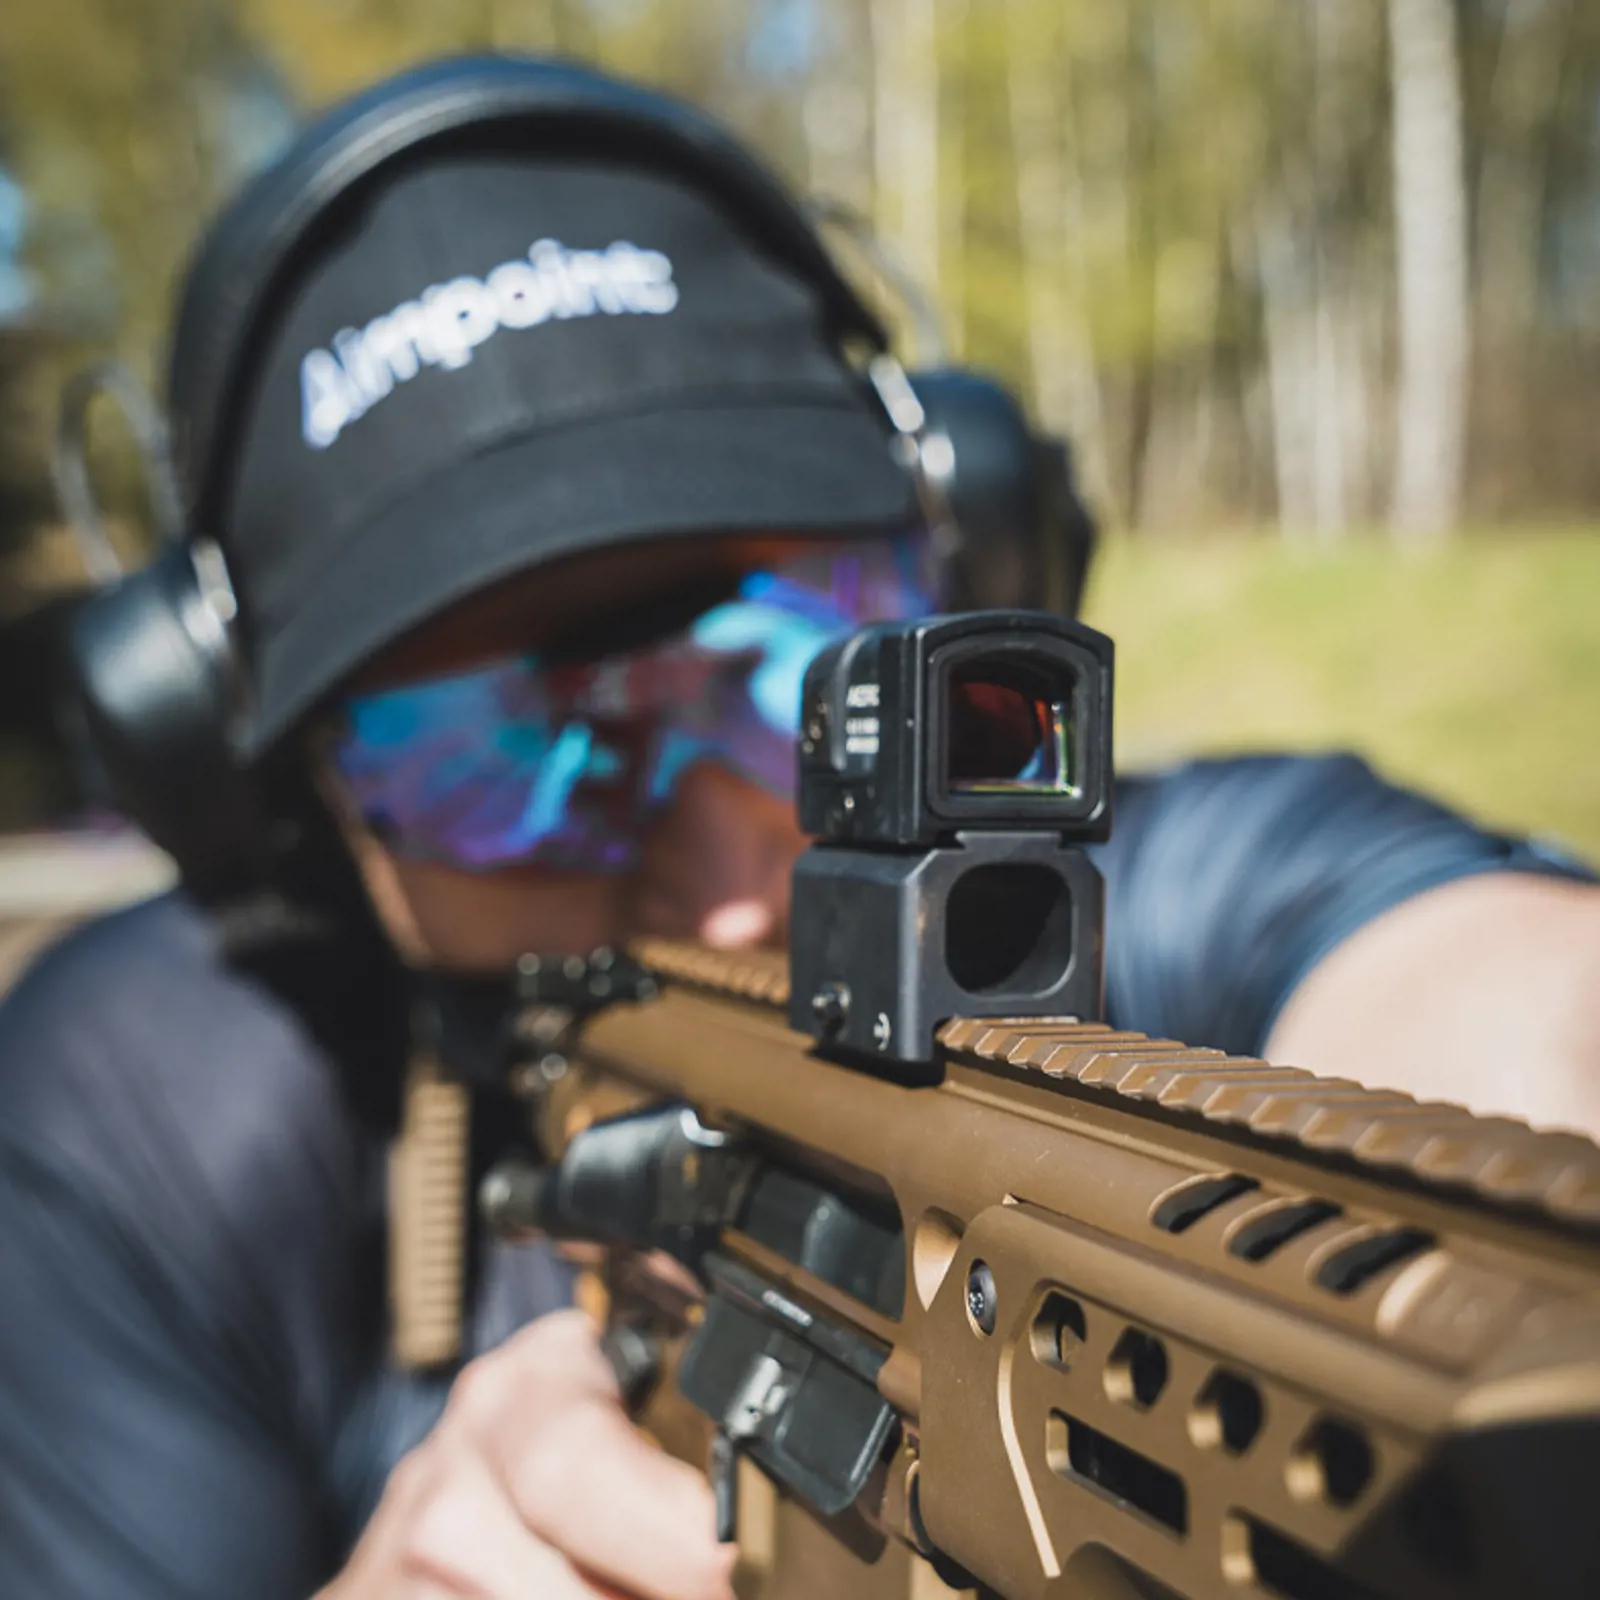 The Aimpoint® Acro P-2 is the next generation in the Acro series with an  optimized technology. With the new battery size of CR2032 and new diode  technology the Acro P-2 will last